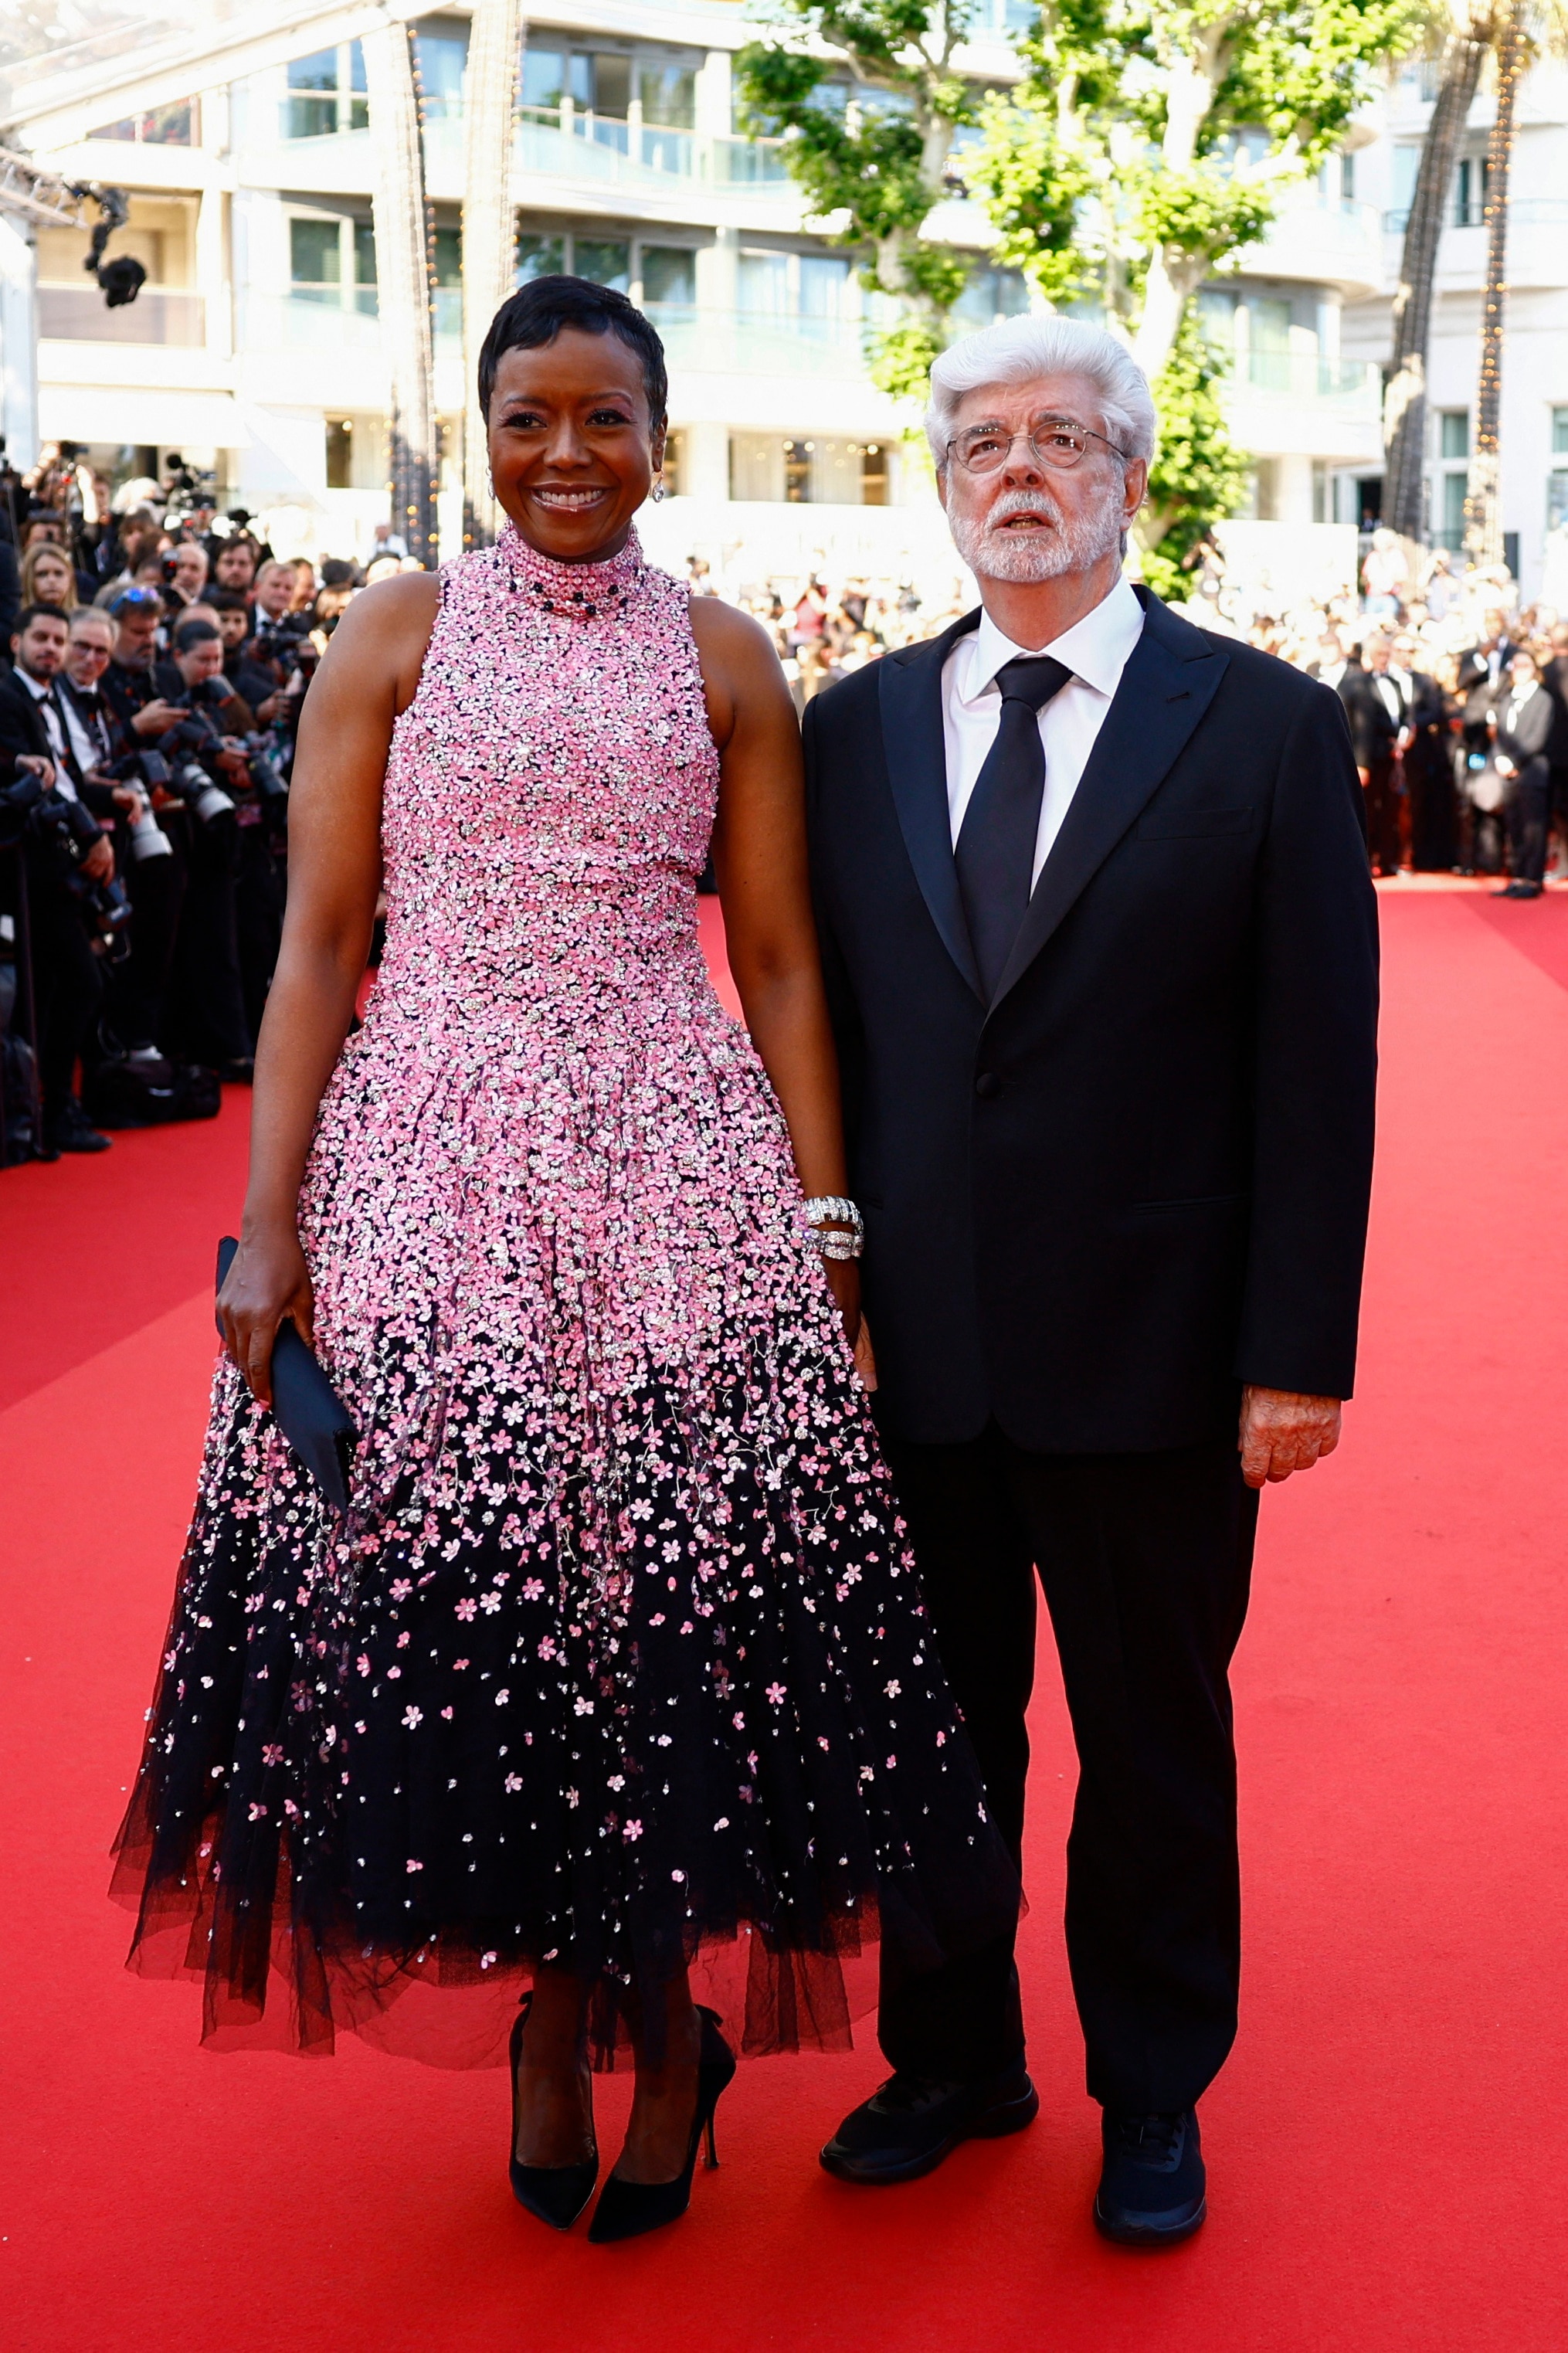 George Lucas wearing a black suit and Mellody Hobson in a pink sparkly high-necked dress which transitions into a black skirt